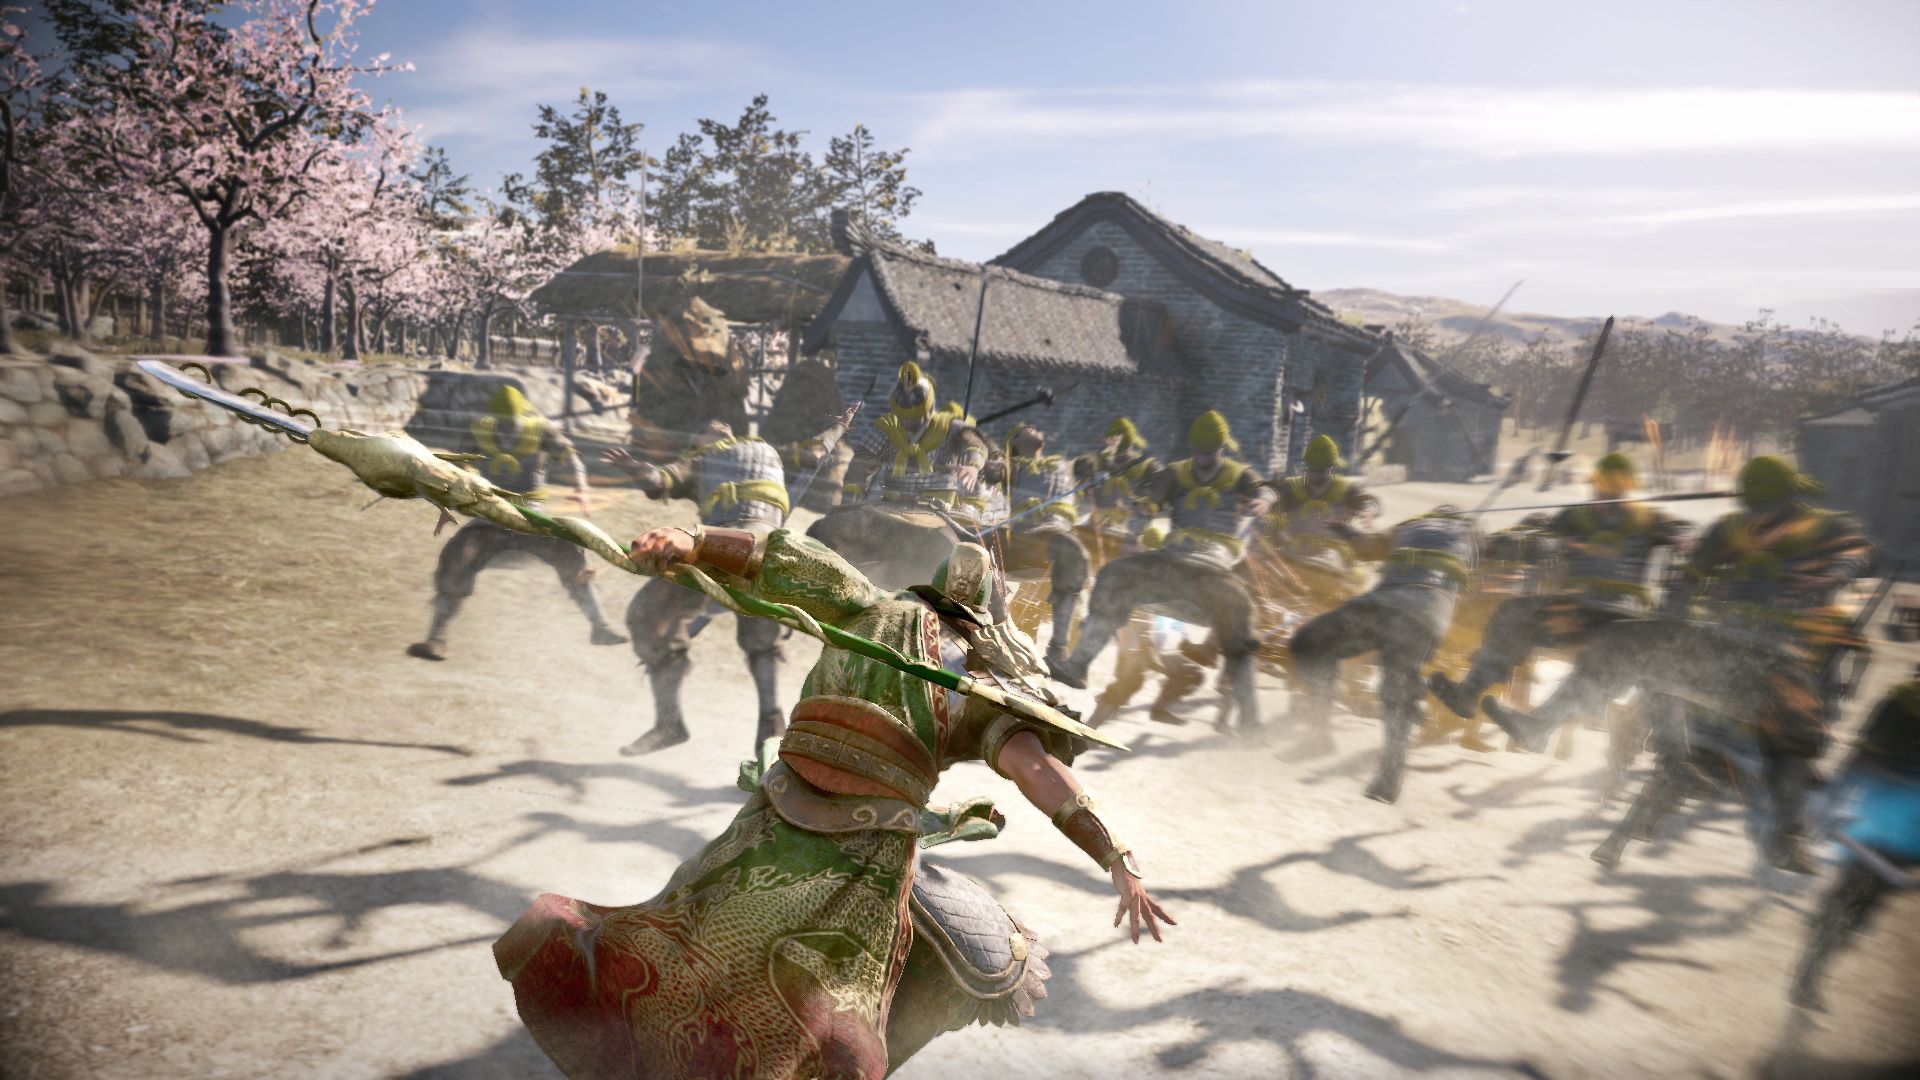 Battle with Yellow Turban Rebellion in a village